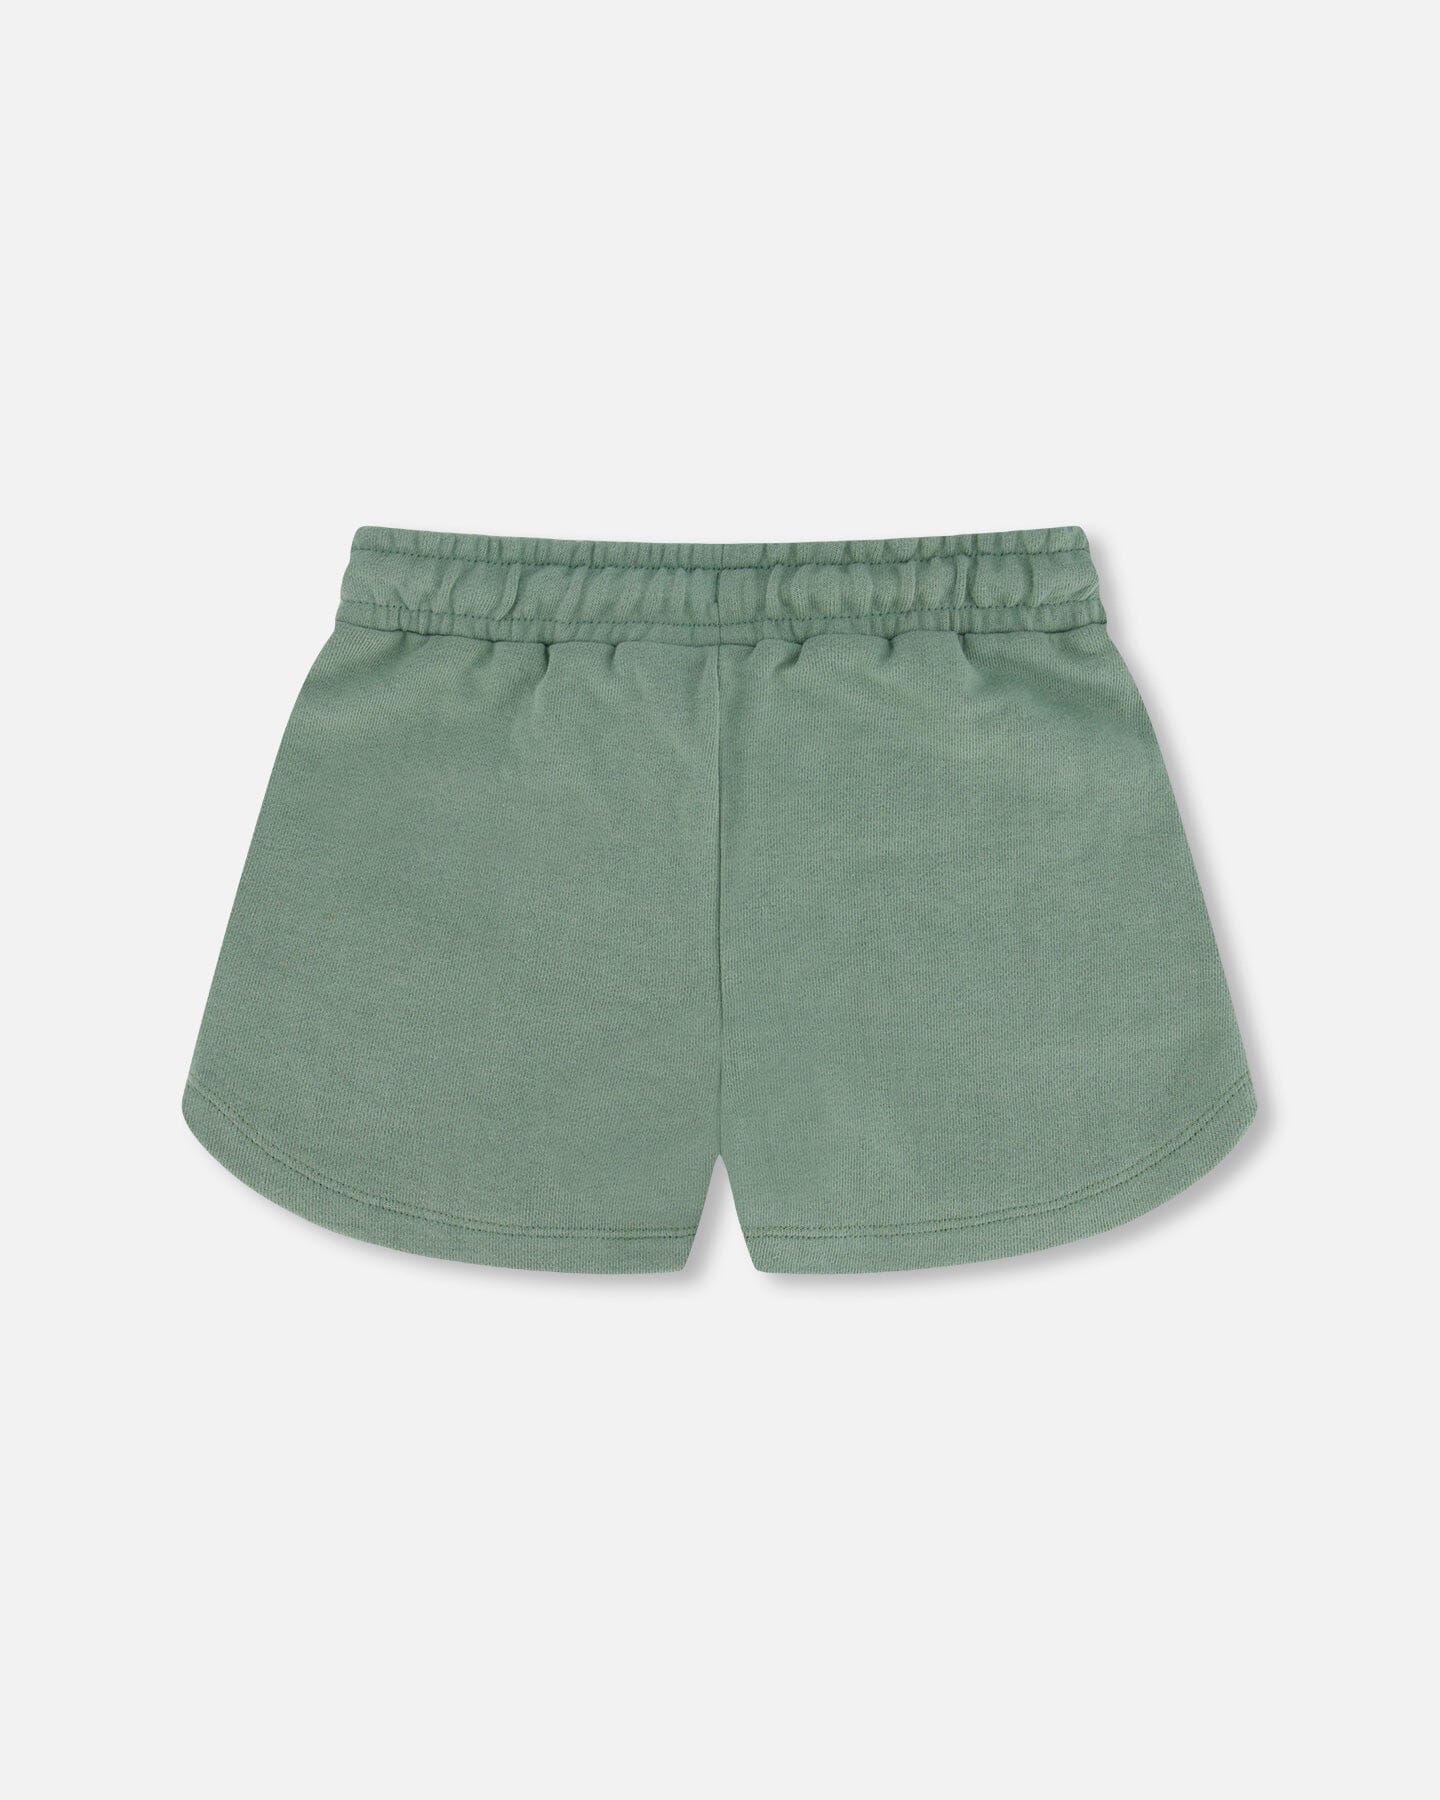 French Terry Short Olive Green - F30H27_340